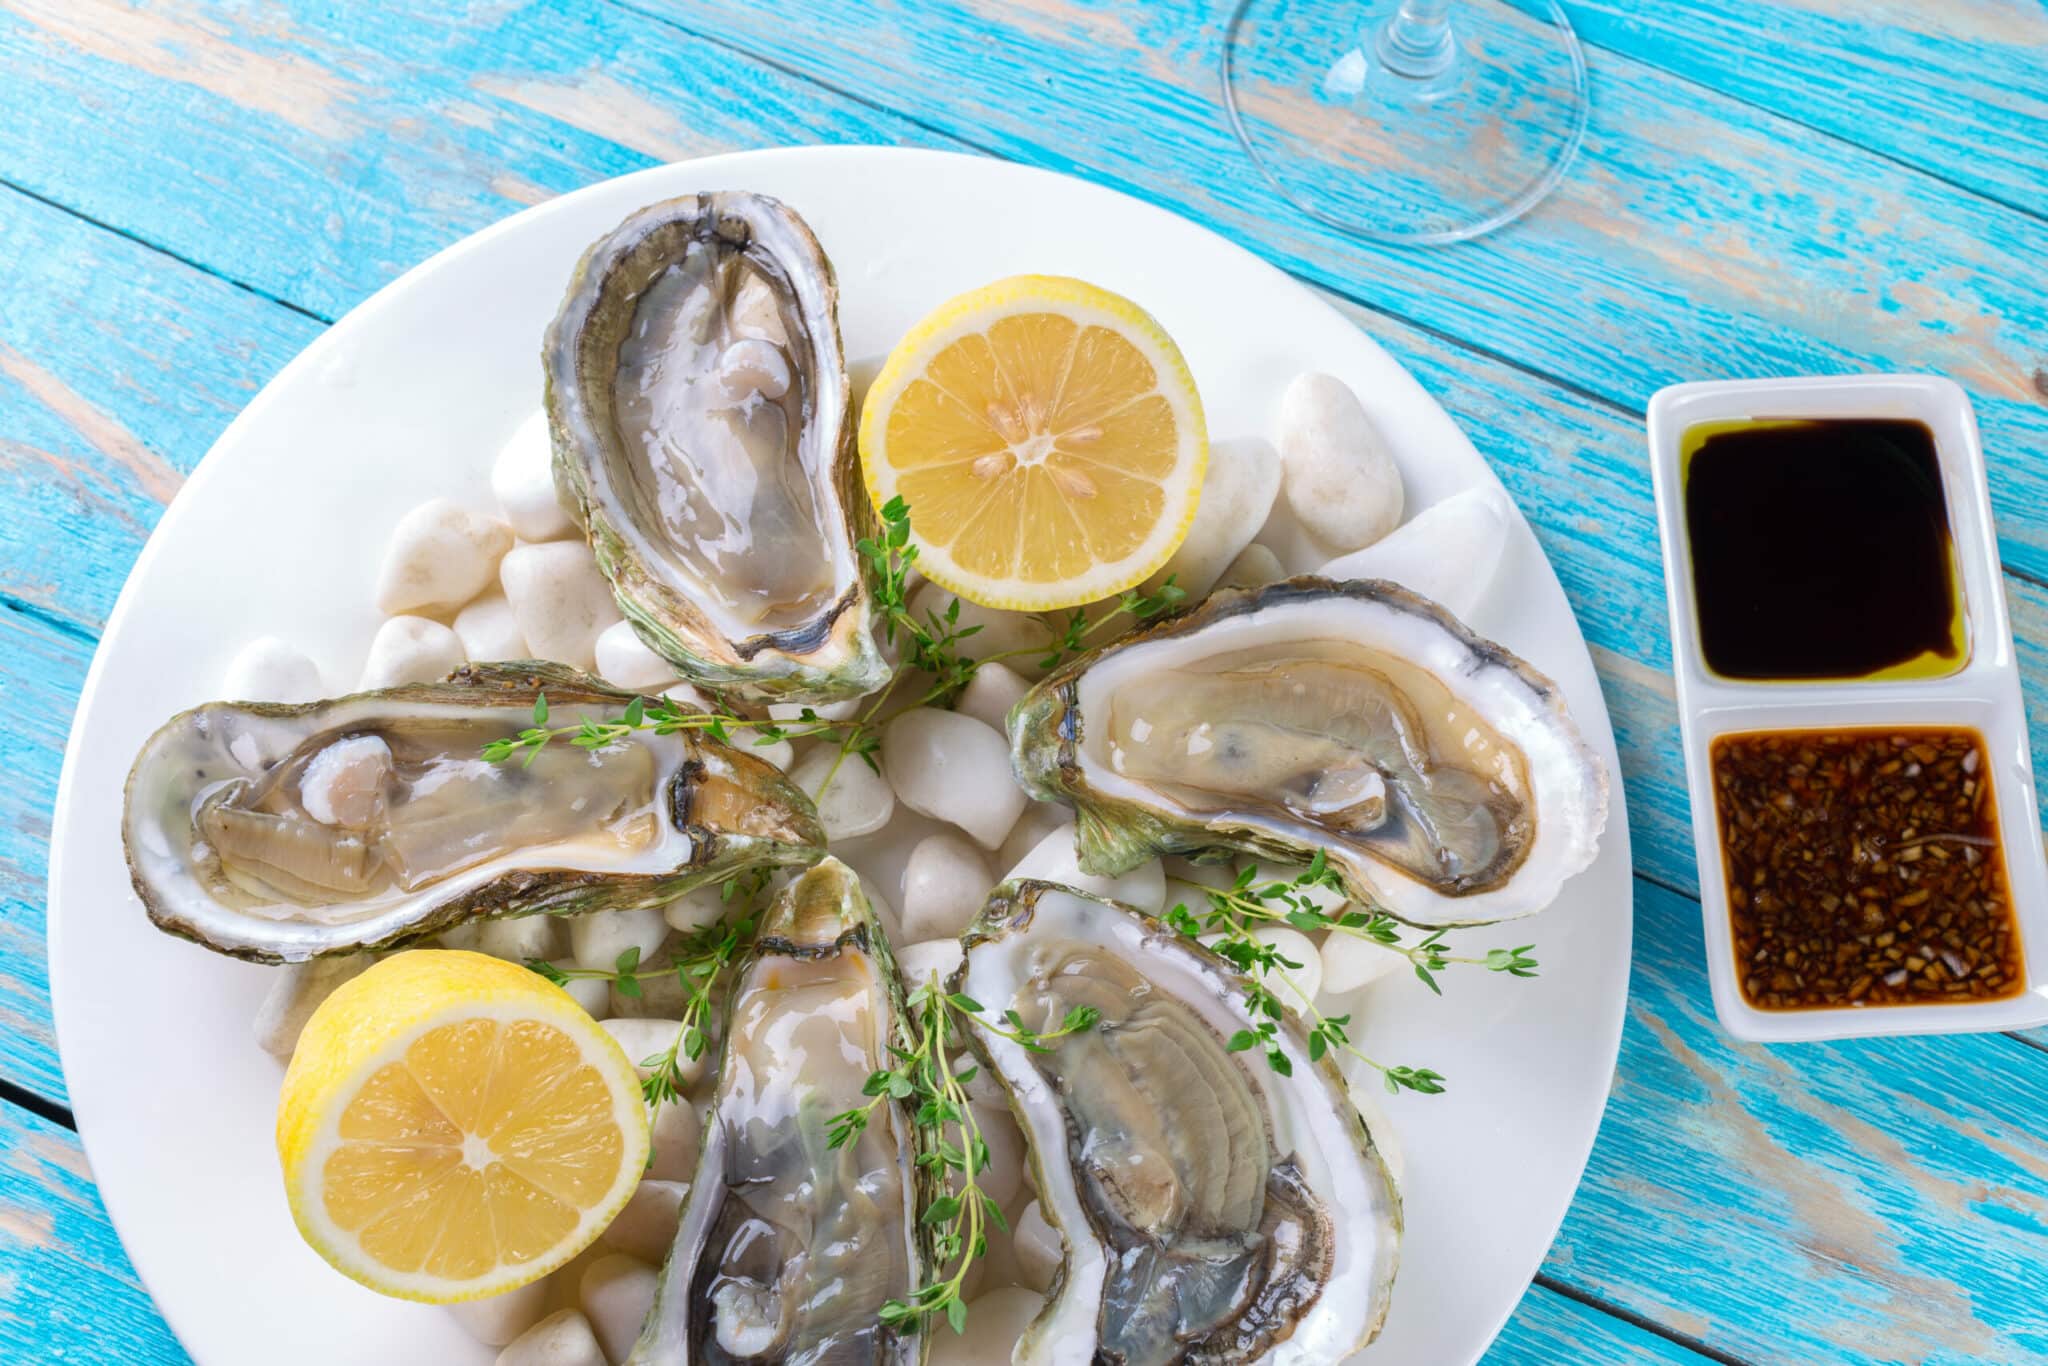 How To Cook Oysters From A Jar